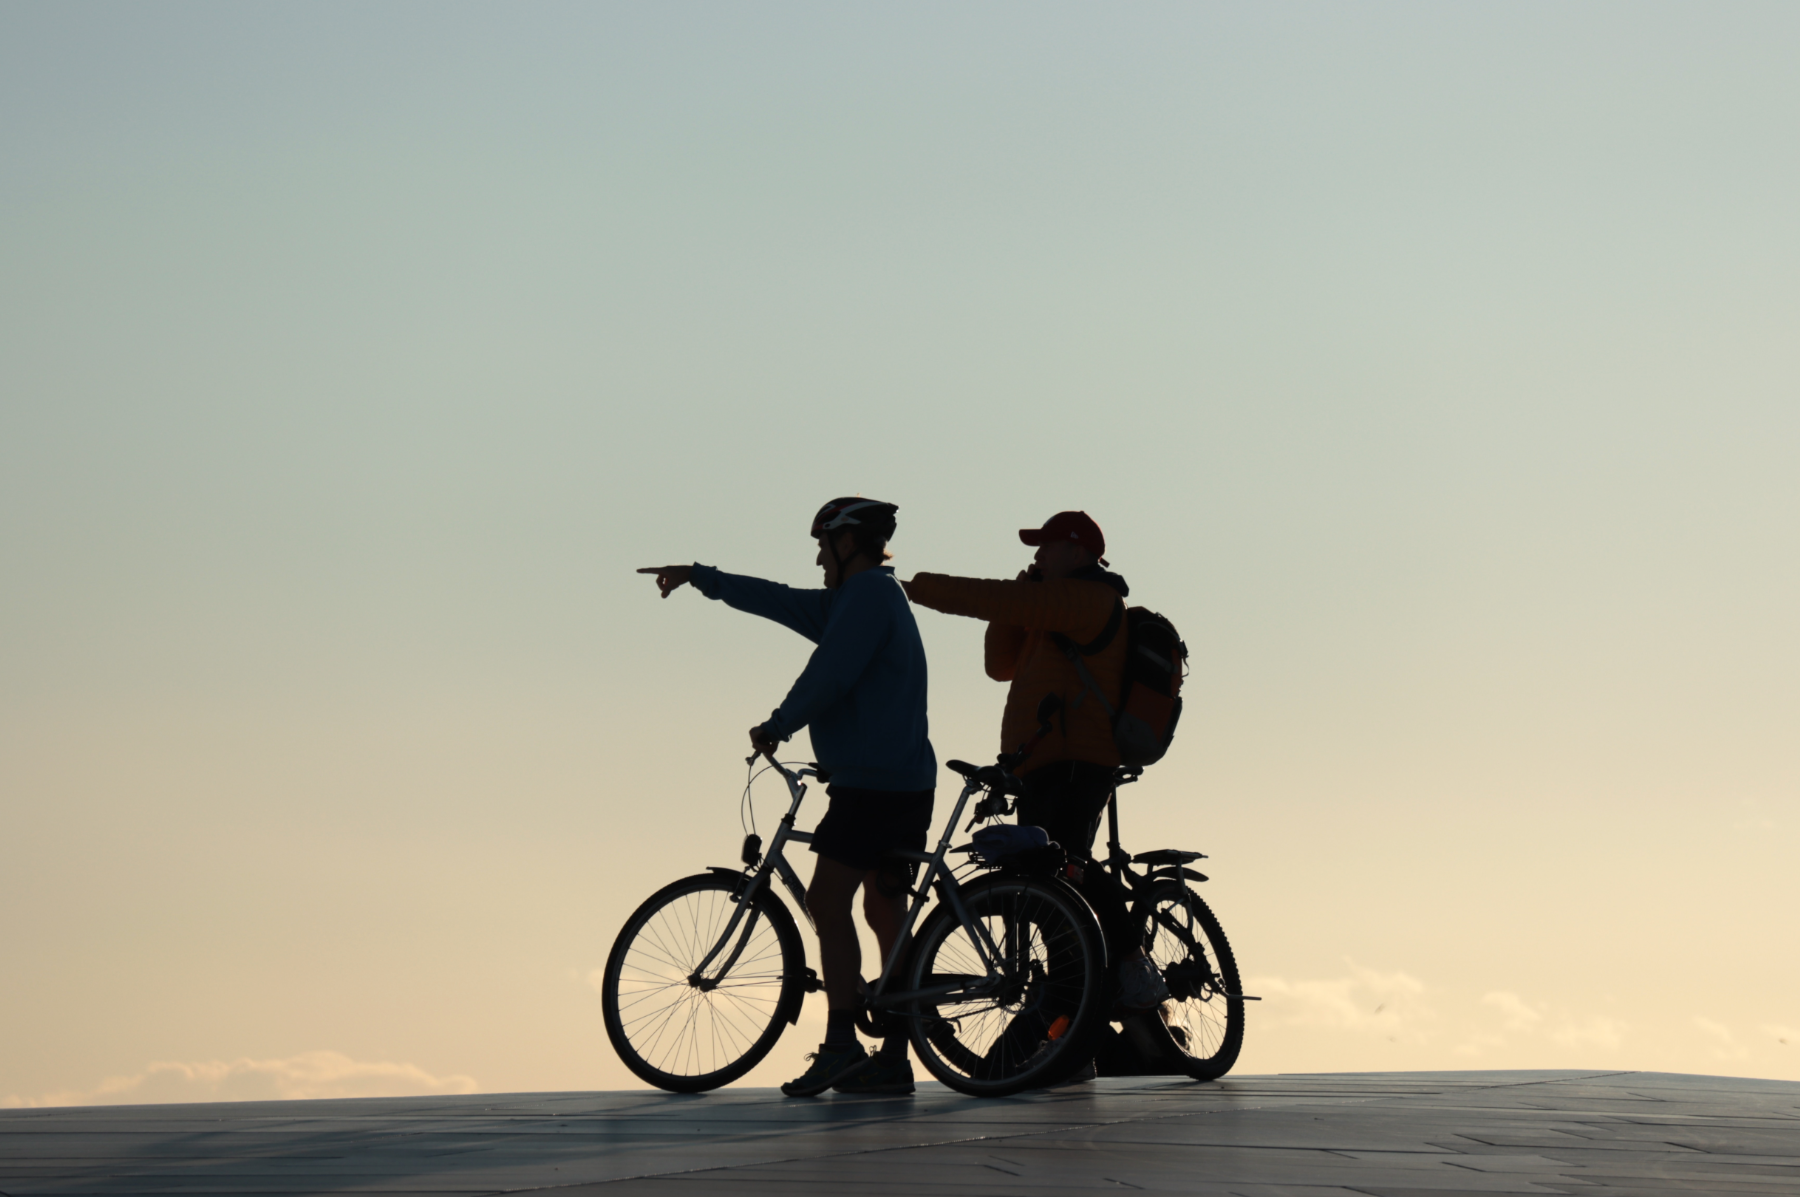 Cyclists pointing out sights at sunset.